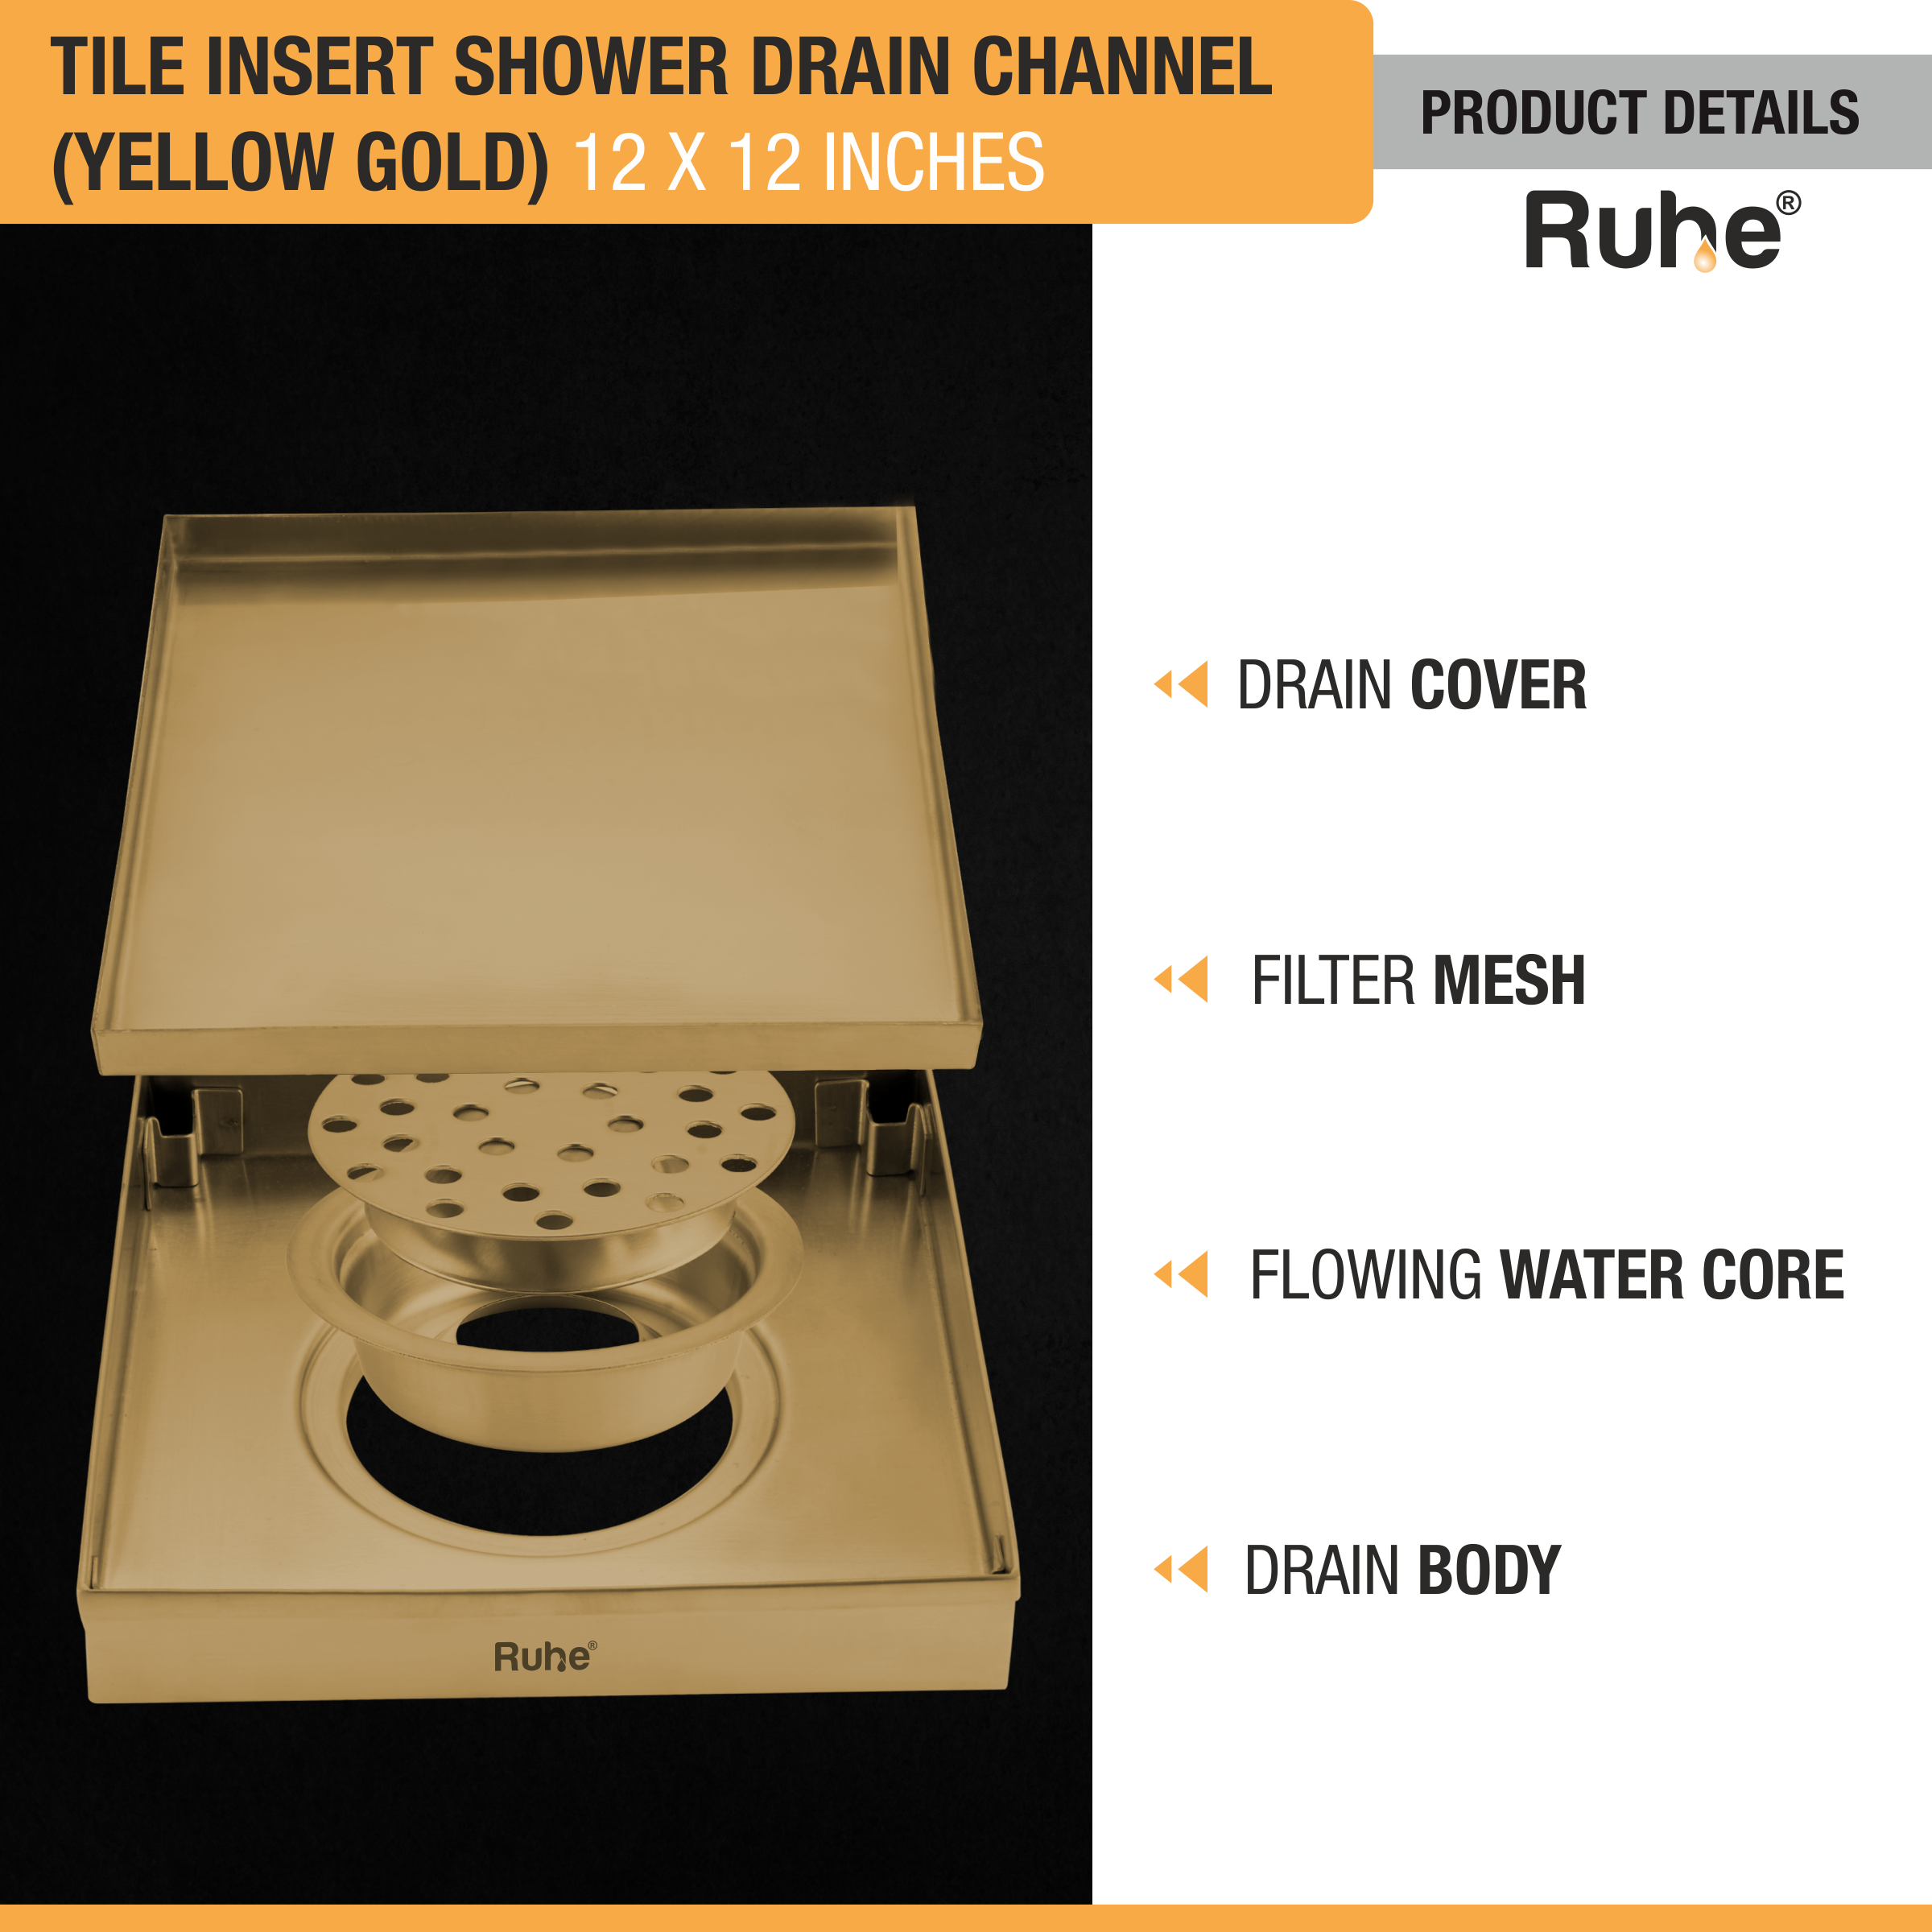 Tile Insert Shower Drain Channel (12 x 12 Inches) YELLOW GOLD product details